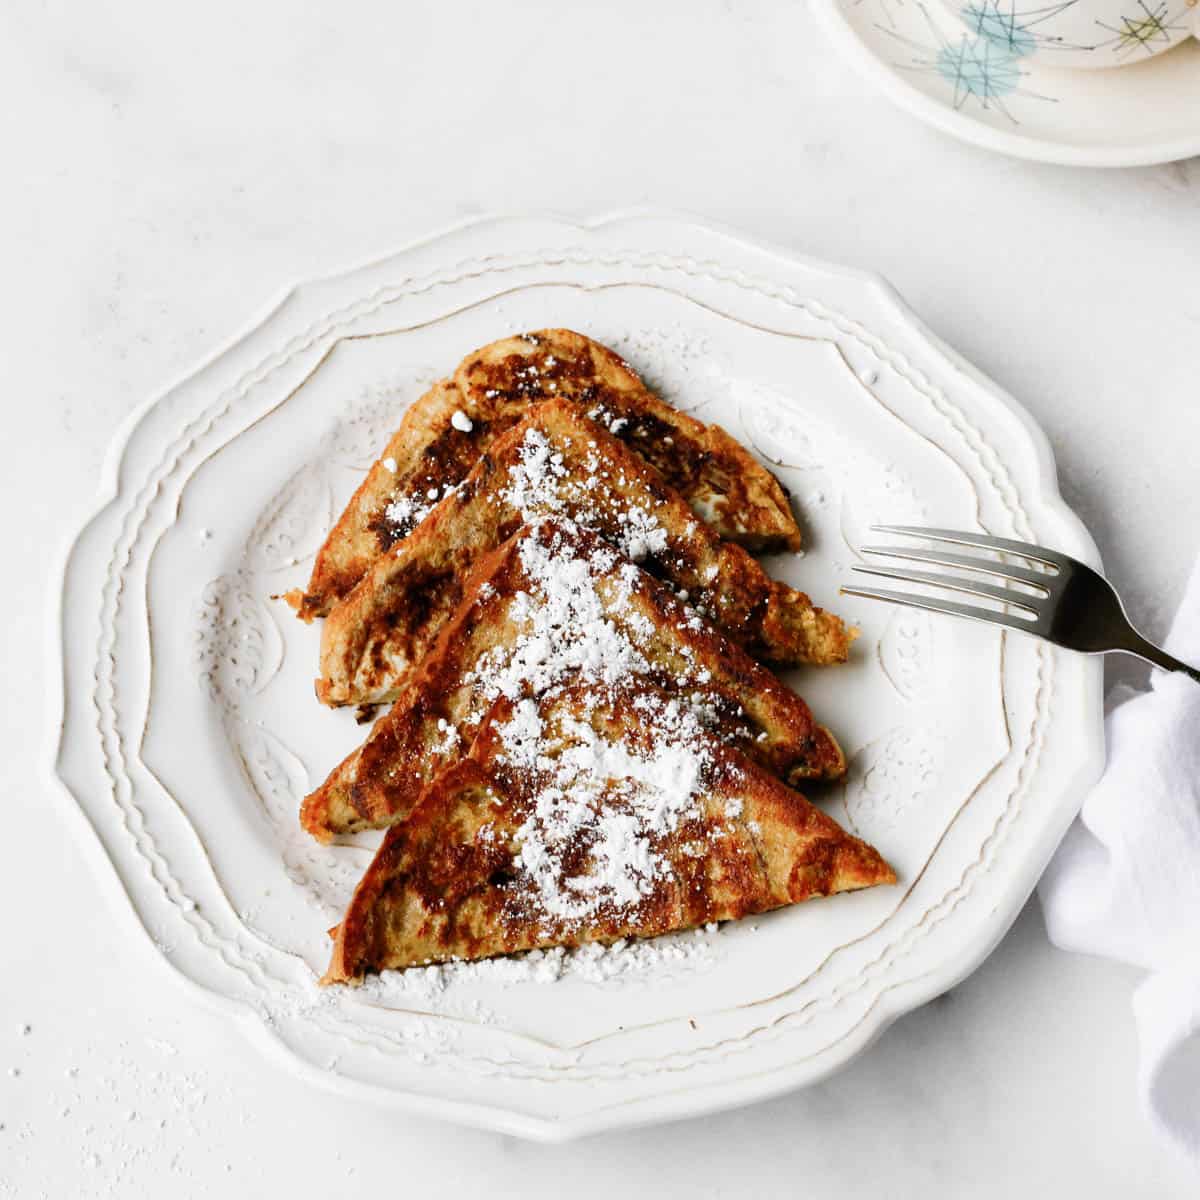 French toast dusted with powdered sugar on plate.